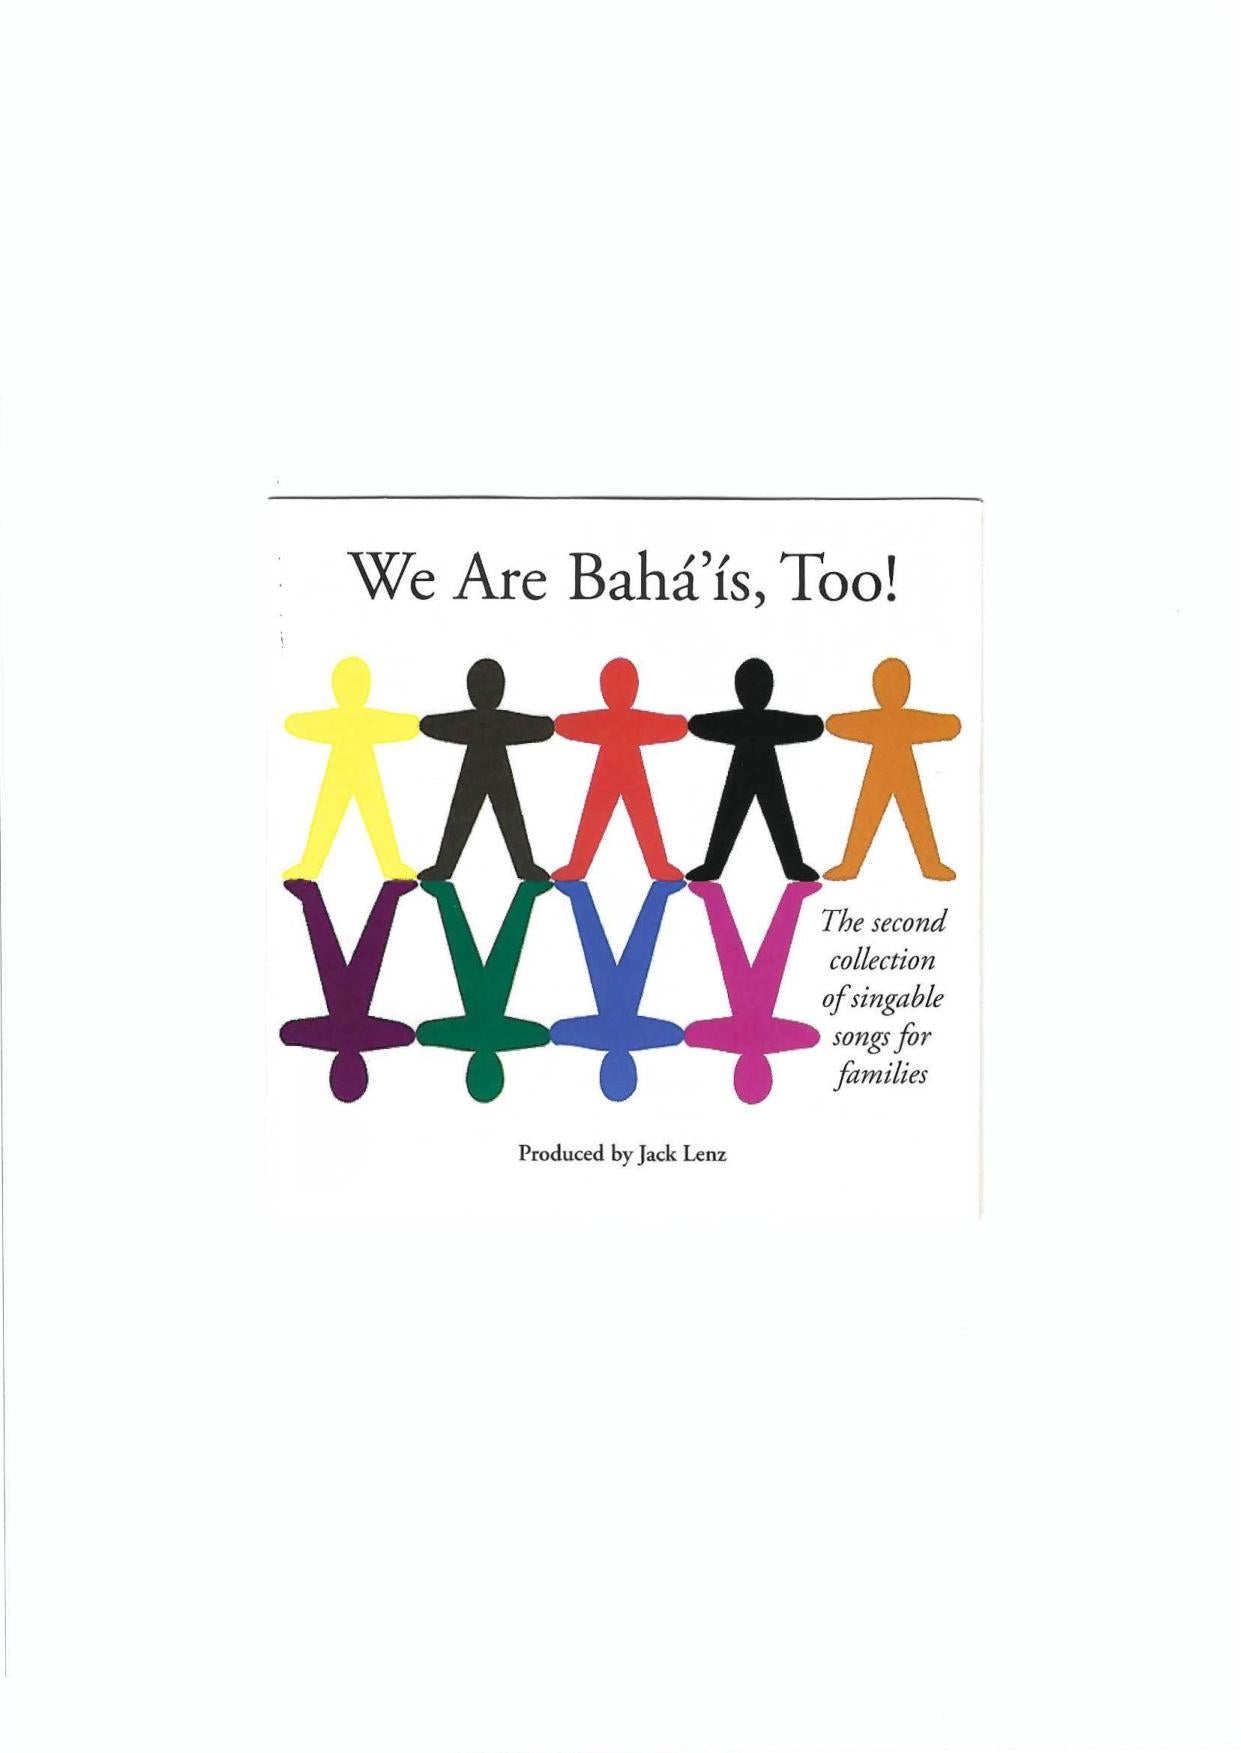 We are Baha’is, Too by Jack Lenz